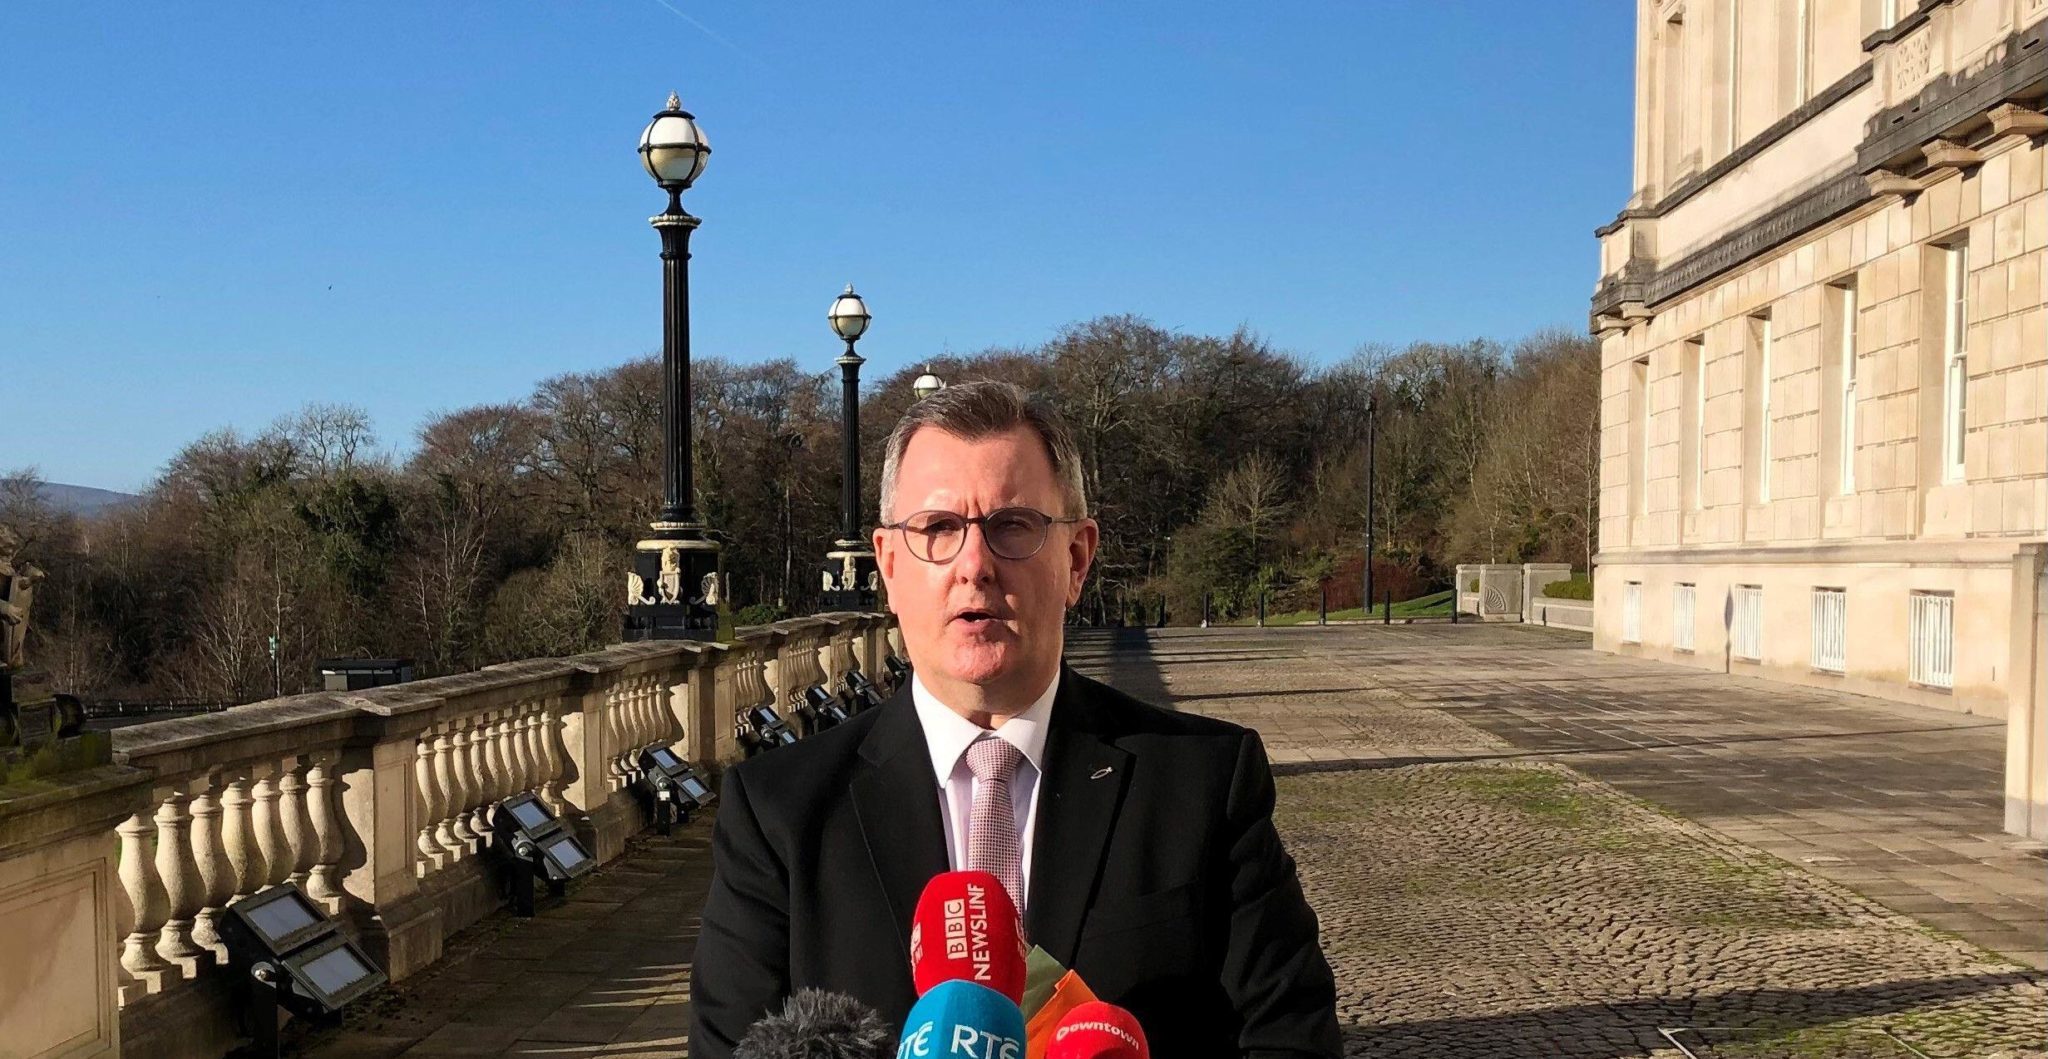 DUP leader Jeffrey Donaldson speaks to the media outside Parliament Buildings in Stormont, Northern Ireland